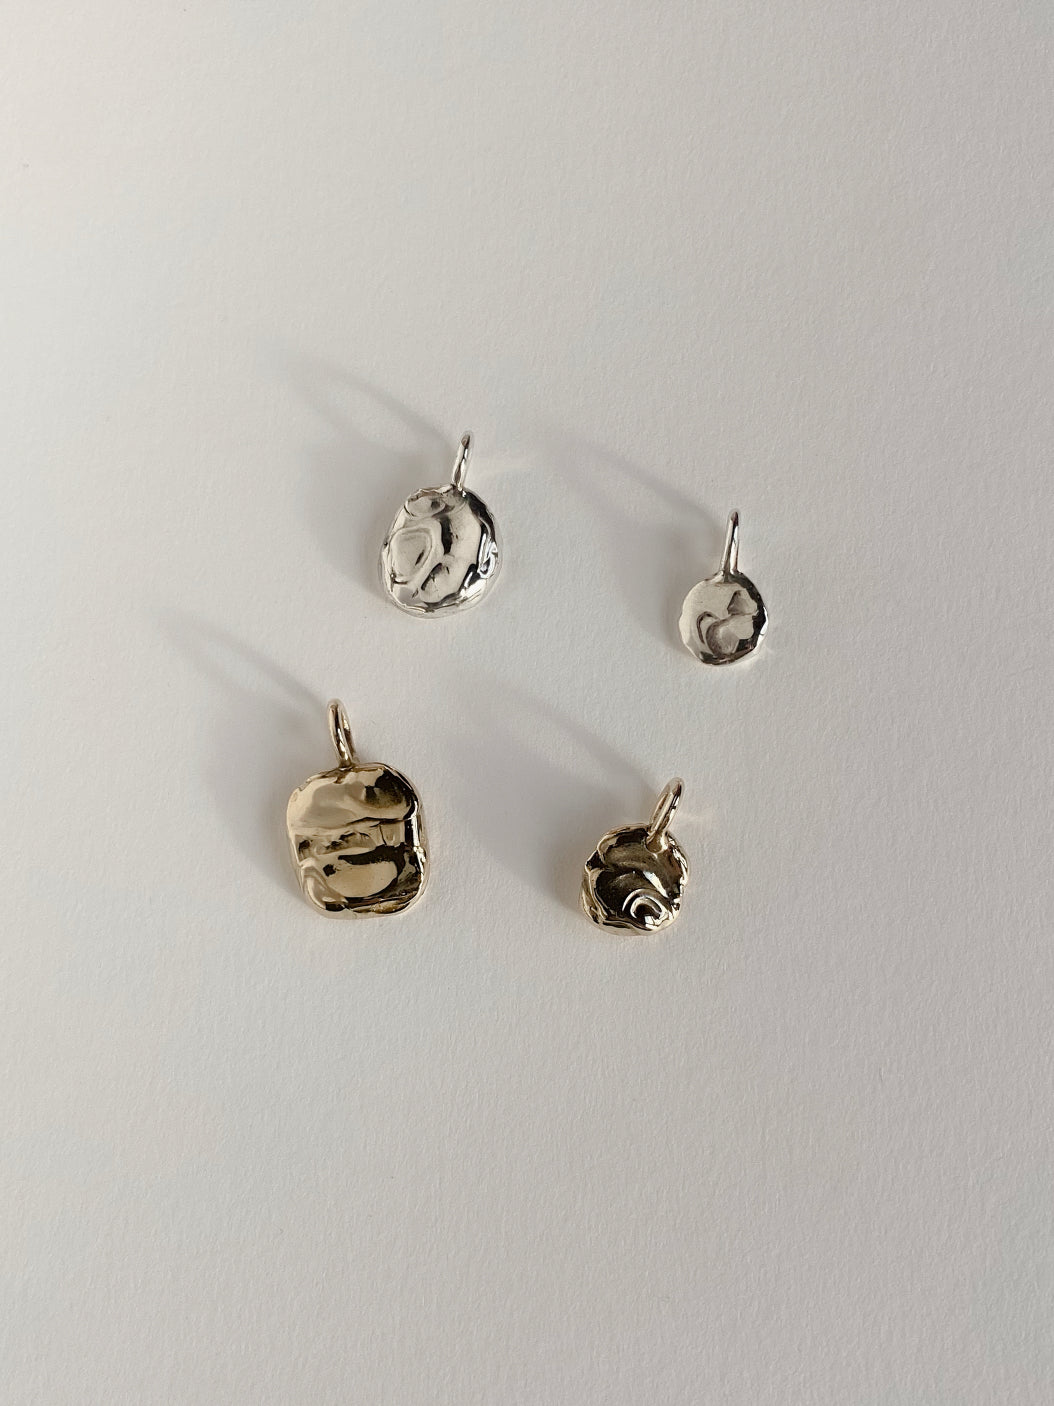 2 silver and 2 gold textured molten pendants on white background